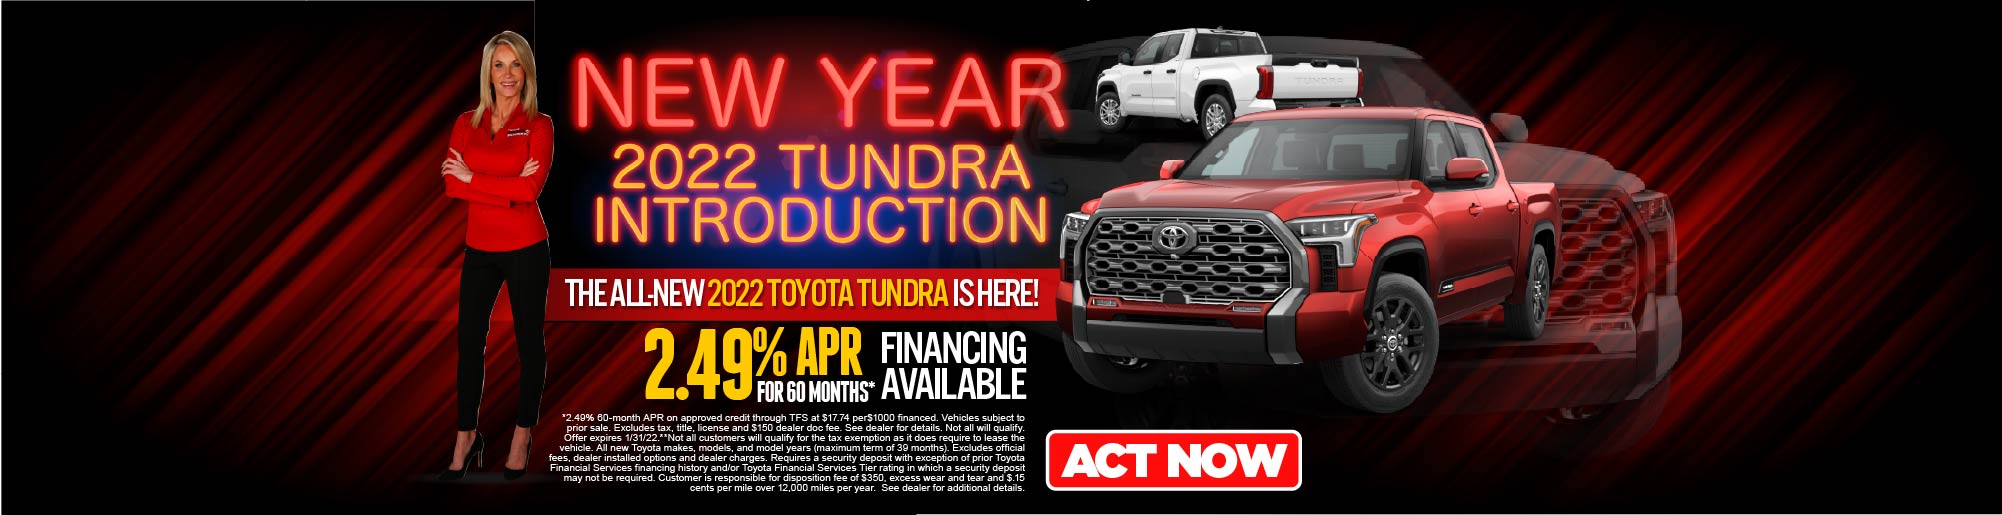 TOYOTATHON IS ON! PAY NO TAXES. HERE NOW! The All New 2022 Toyota Tundra -2.49% APR FOR 60 MONTHS* FININCING AVAILABLE. Act Now